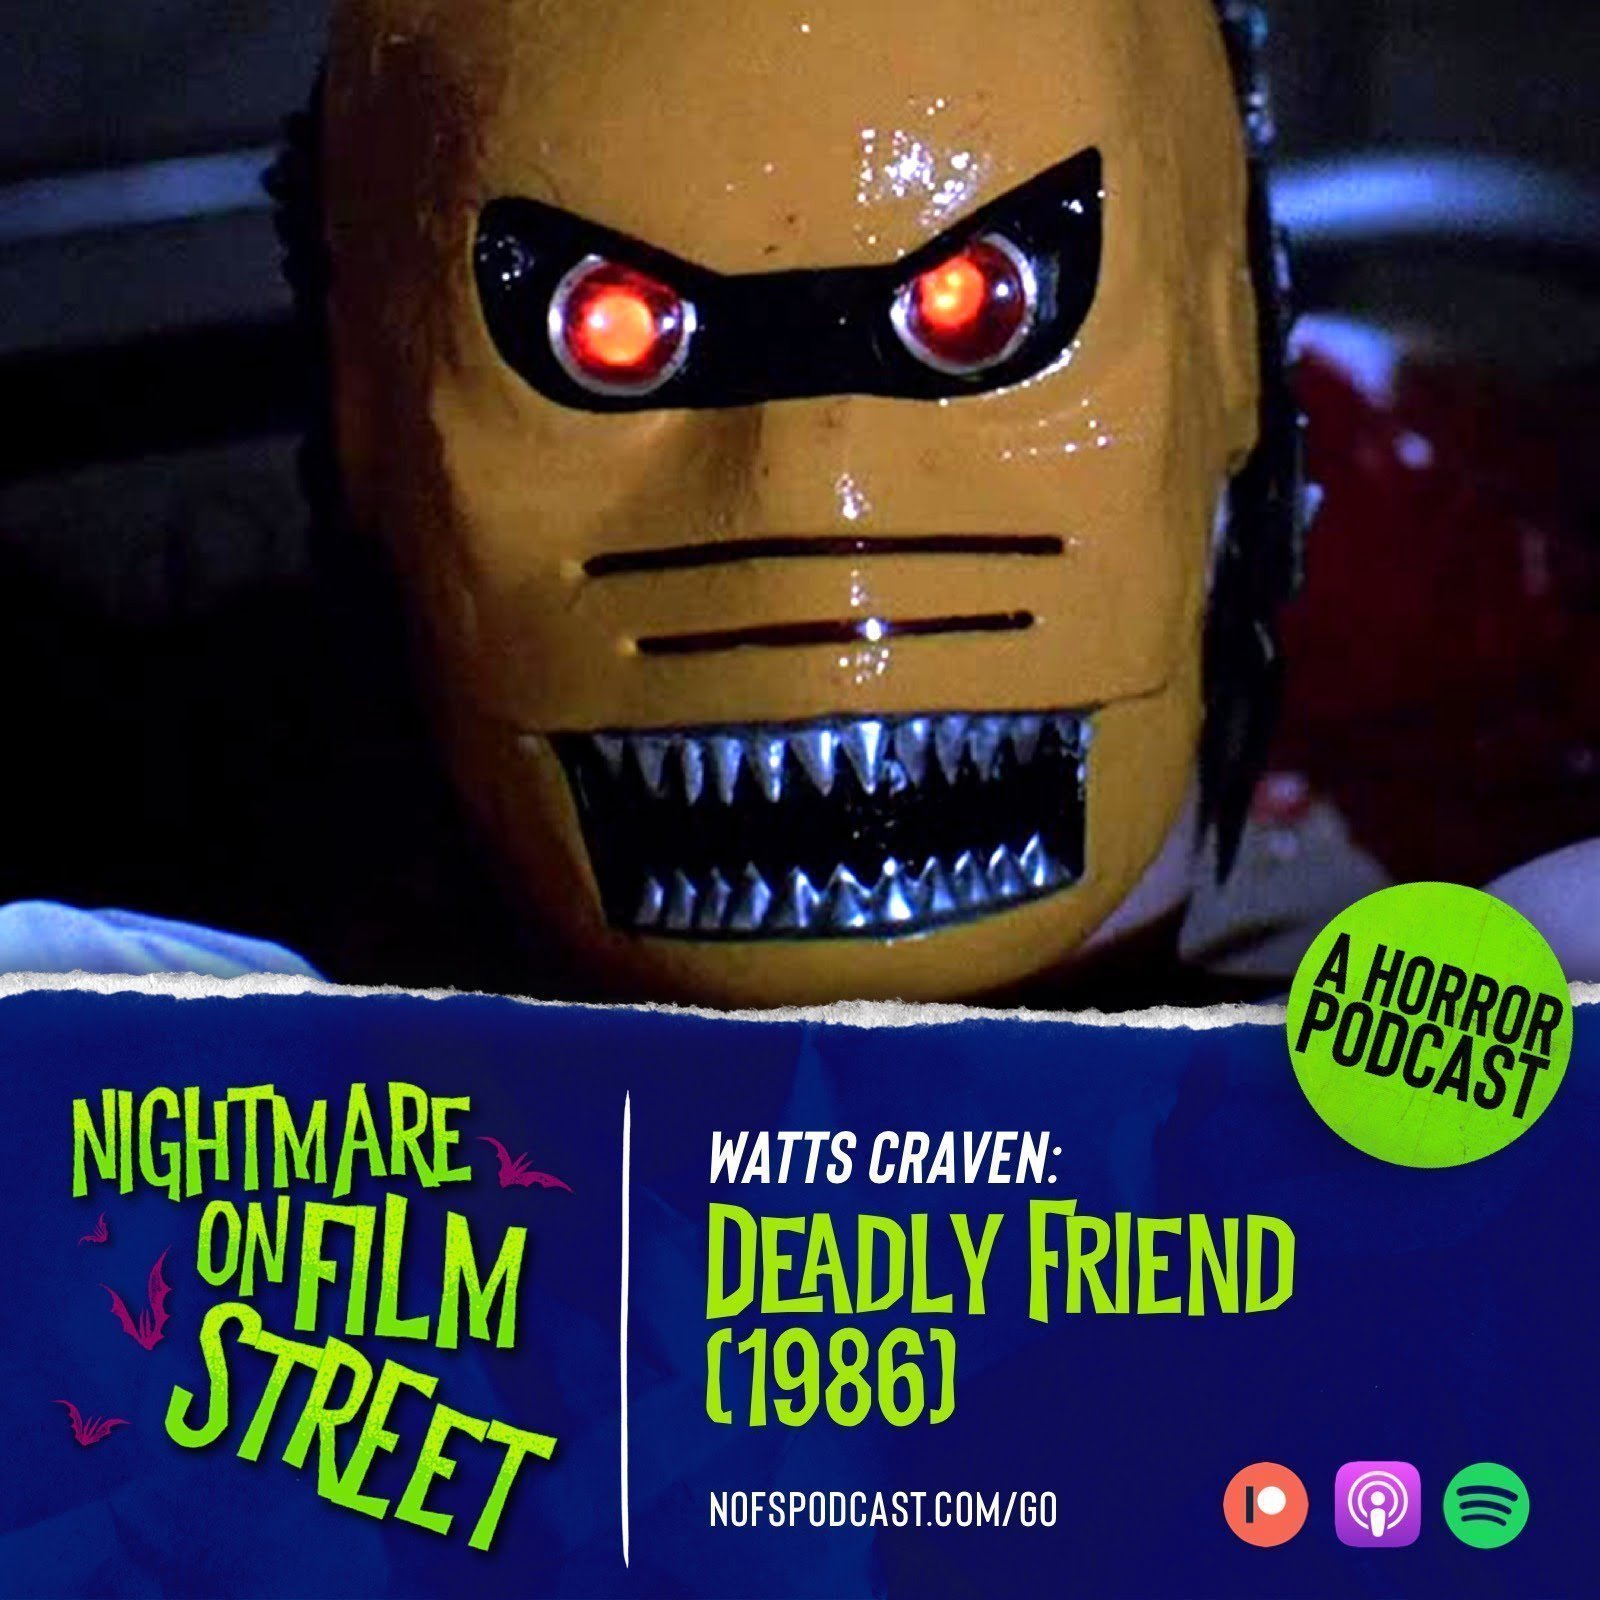 Nightmare on Film Street Podcast - Watts Craven Deadly Friend (1986)